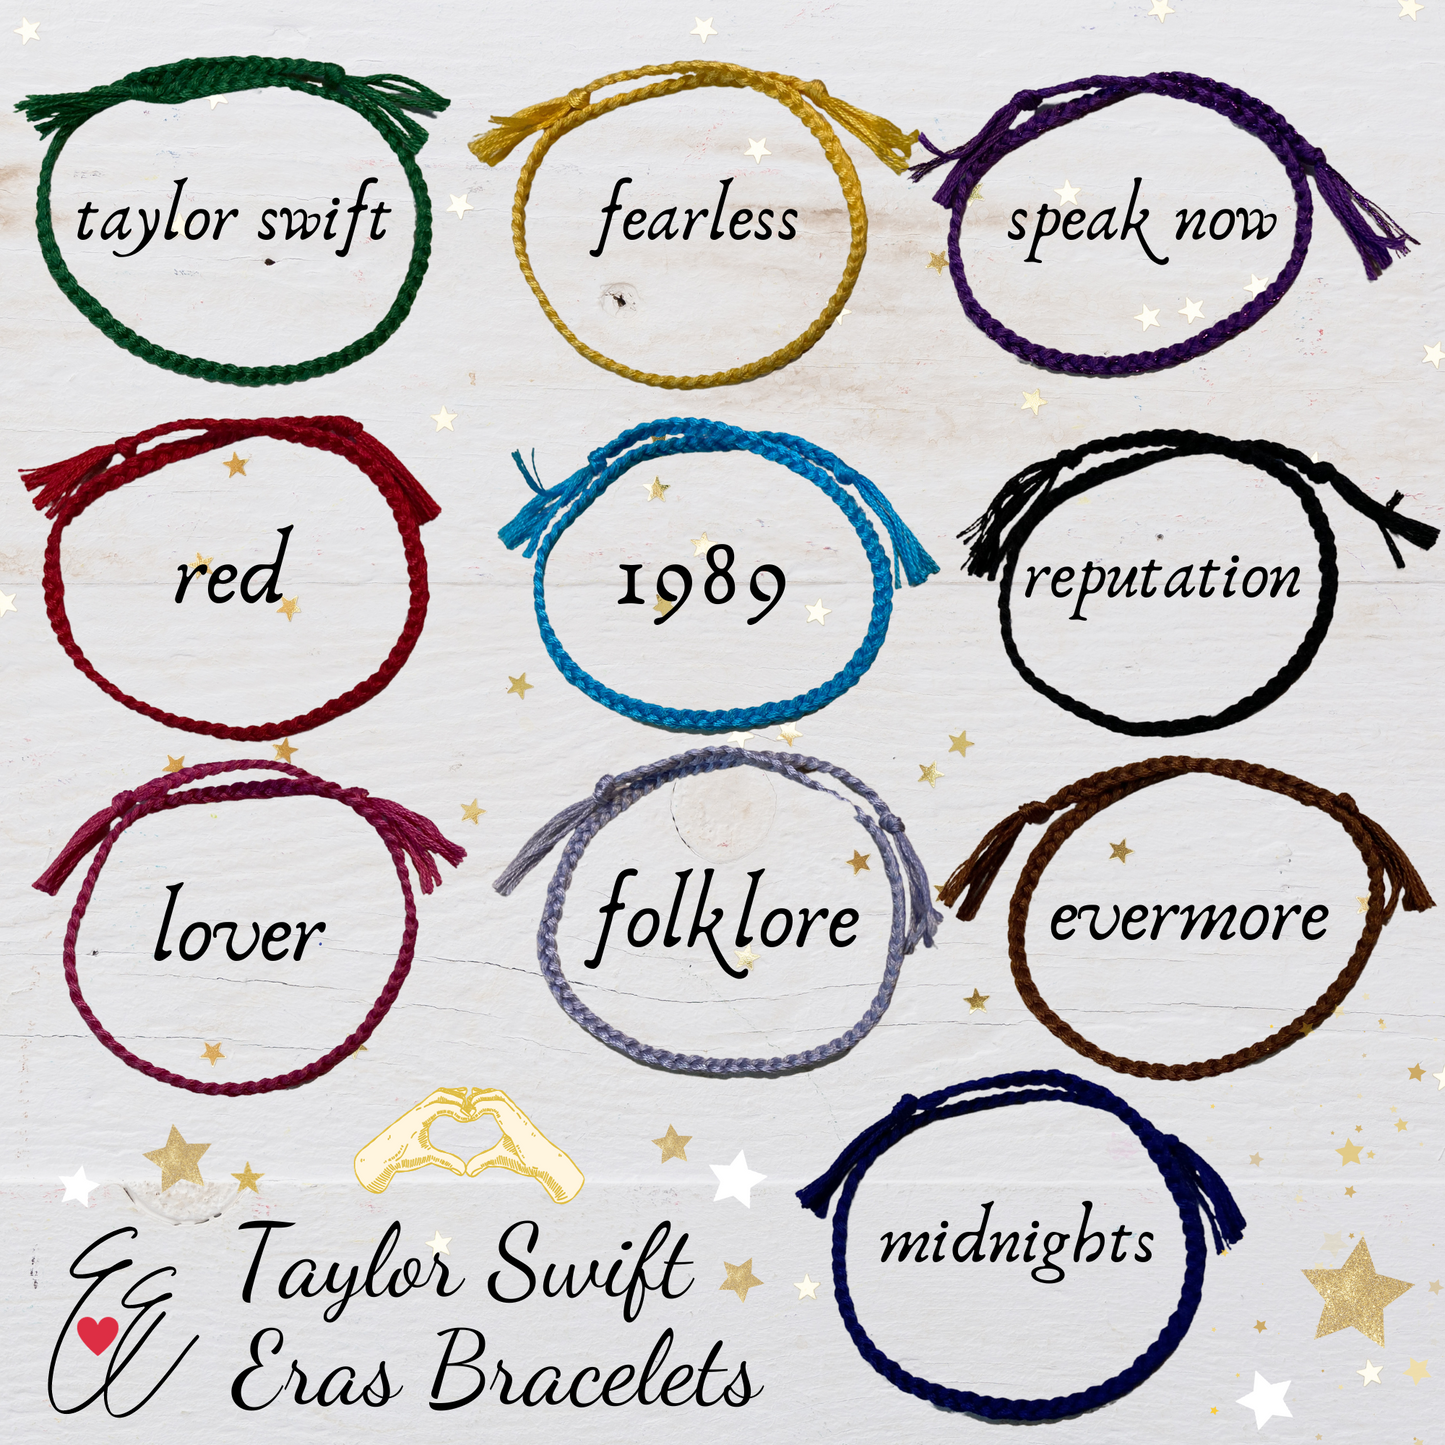 Taylor Friendship Bracelets 1989 / Red and White